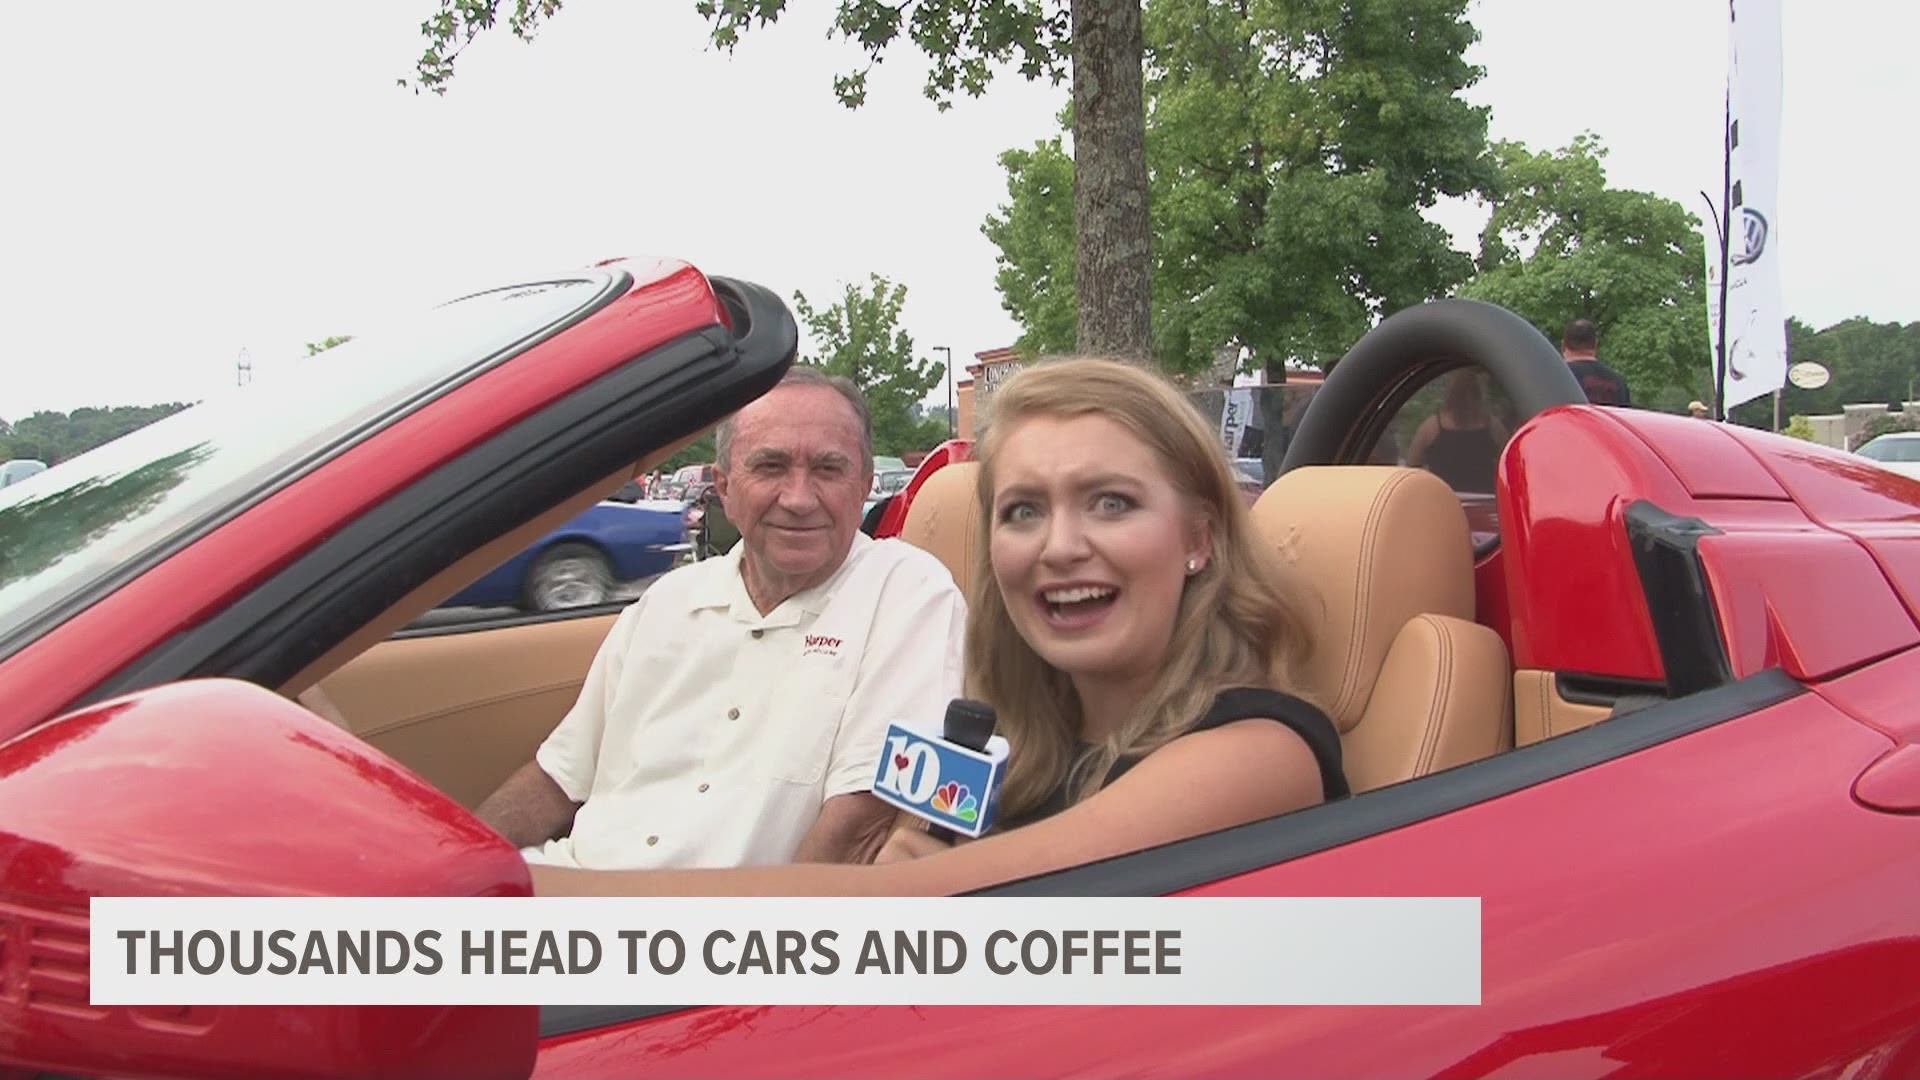 Harper Auto Square's Cars and Coffee event at West Town Mall had thousands of visitors on Sunday.